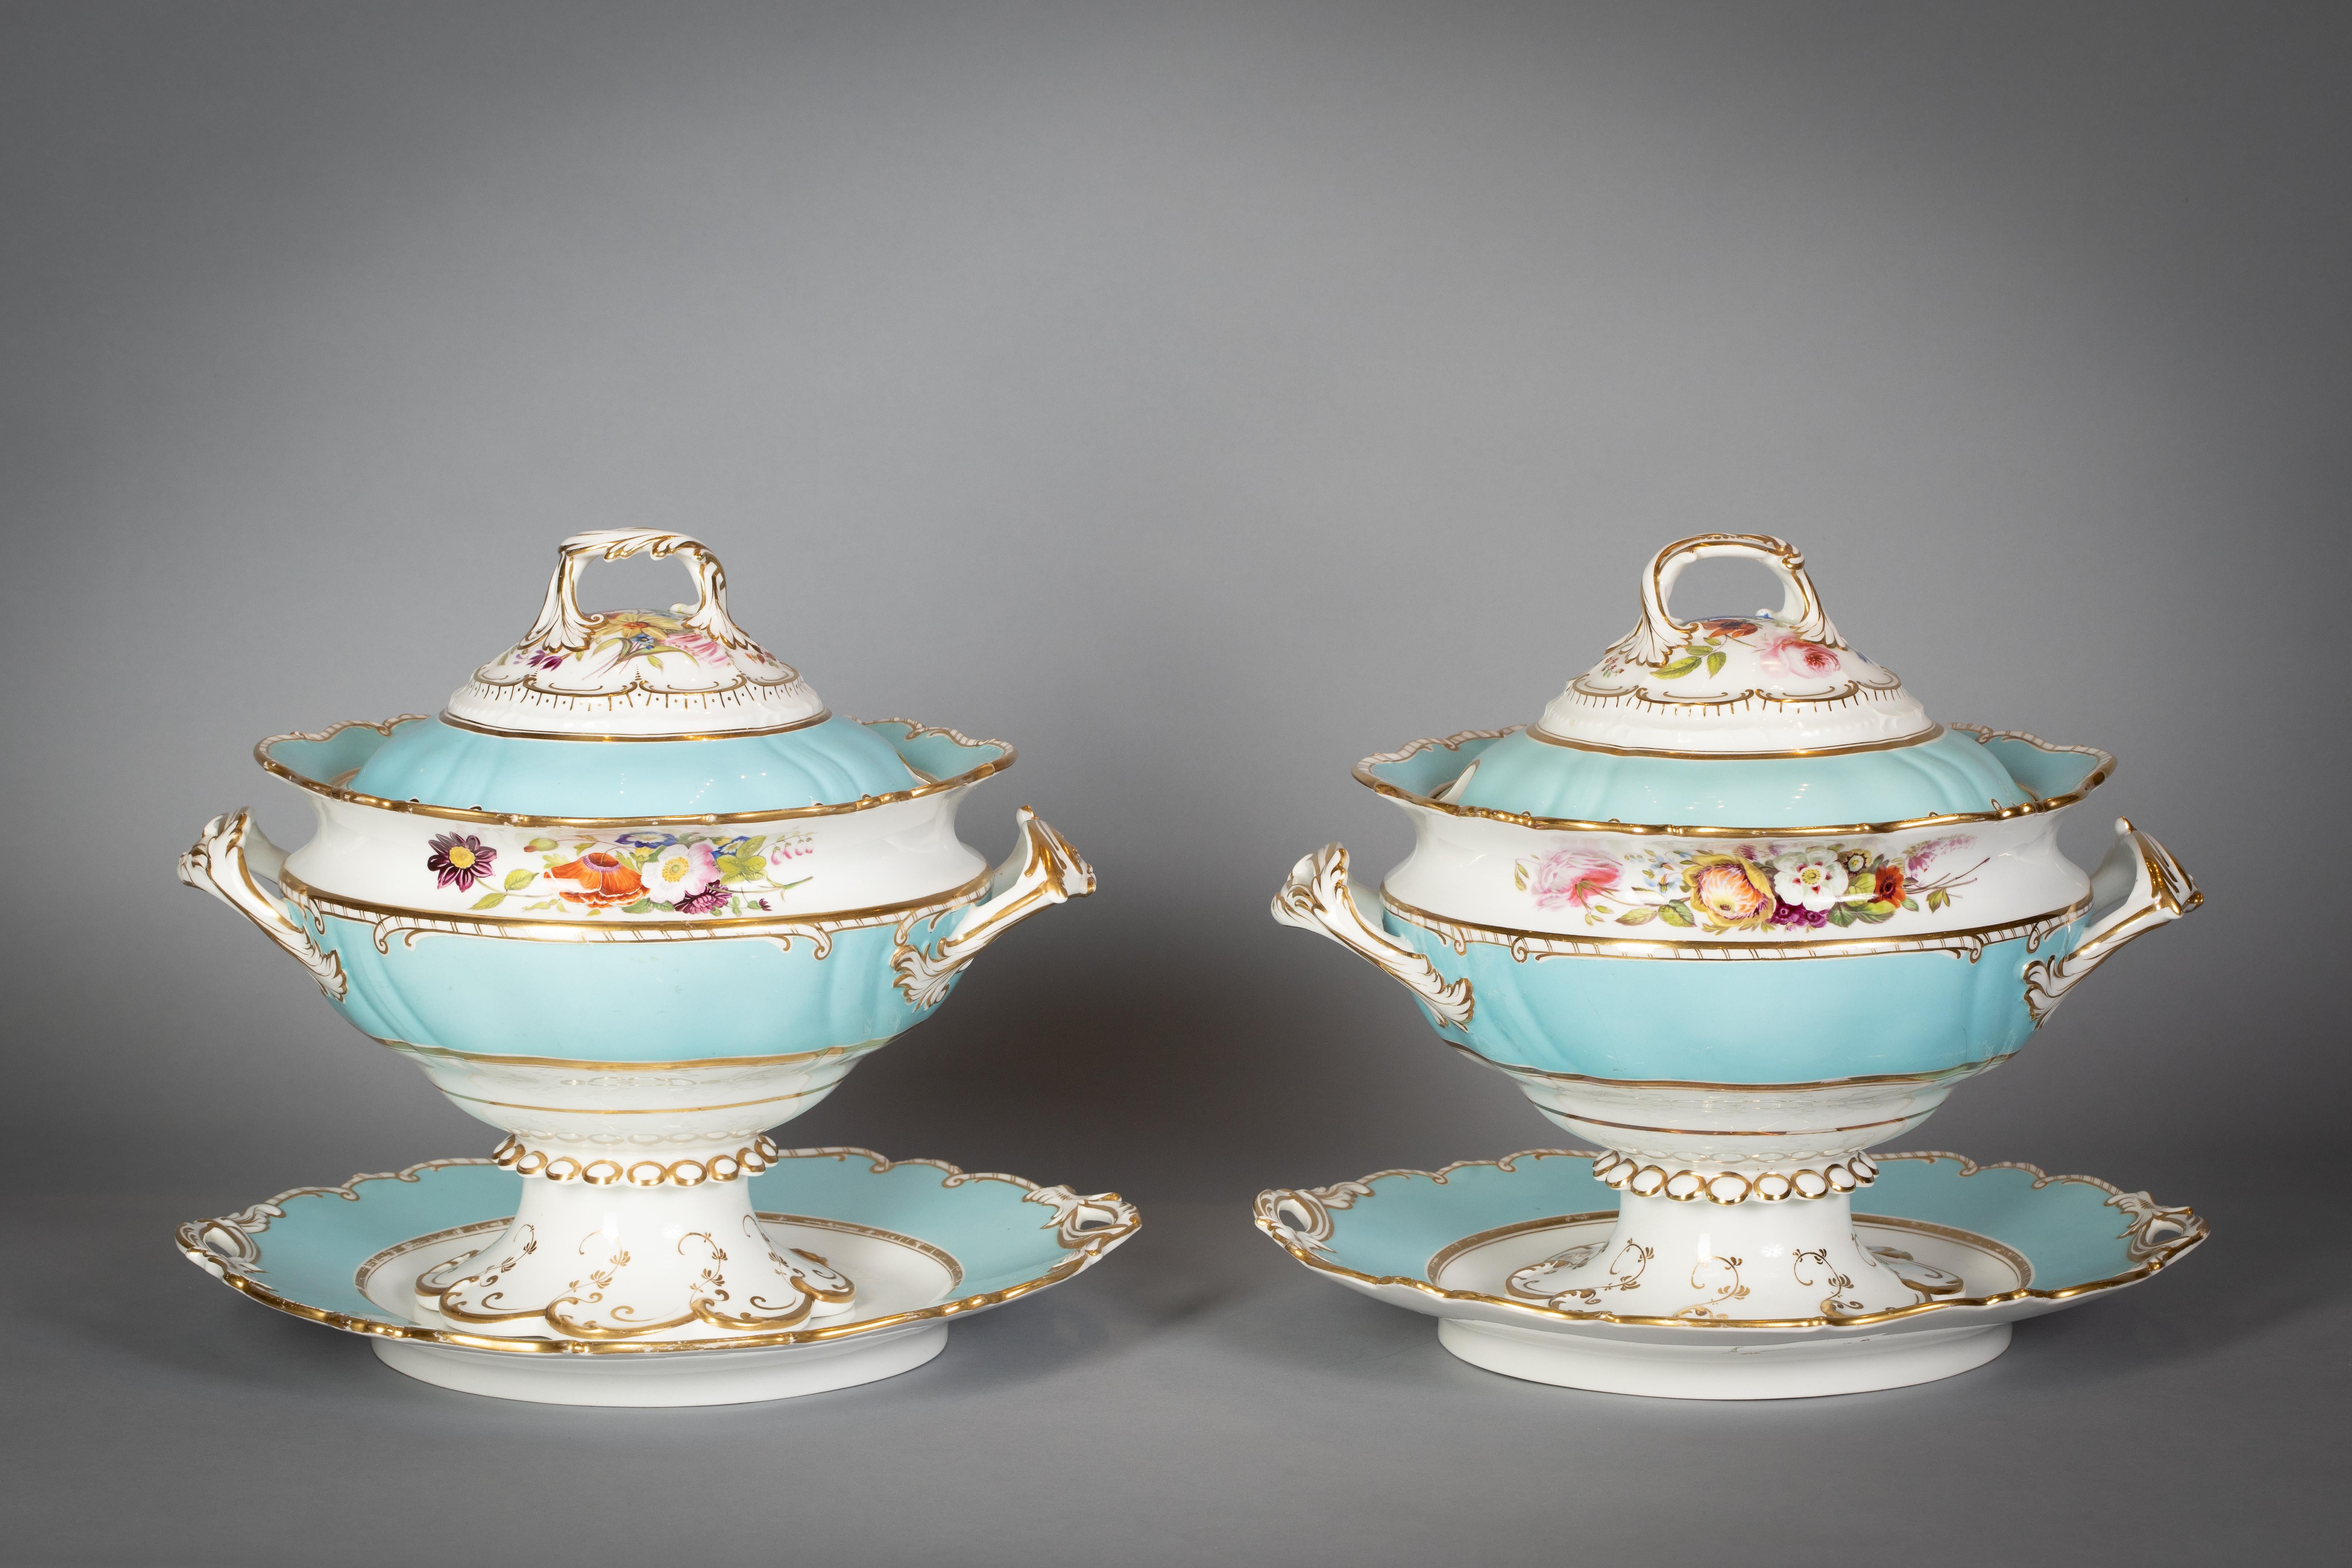 With a soft turquoise ground, painted with a fine spray of flowers, with gilt scroll and dash borders. Comprising pair of covered tureens and stands, pair of vegetable tureens, well and tree platter, 9 soup plates, 57 dinner plates, 3 platters.